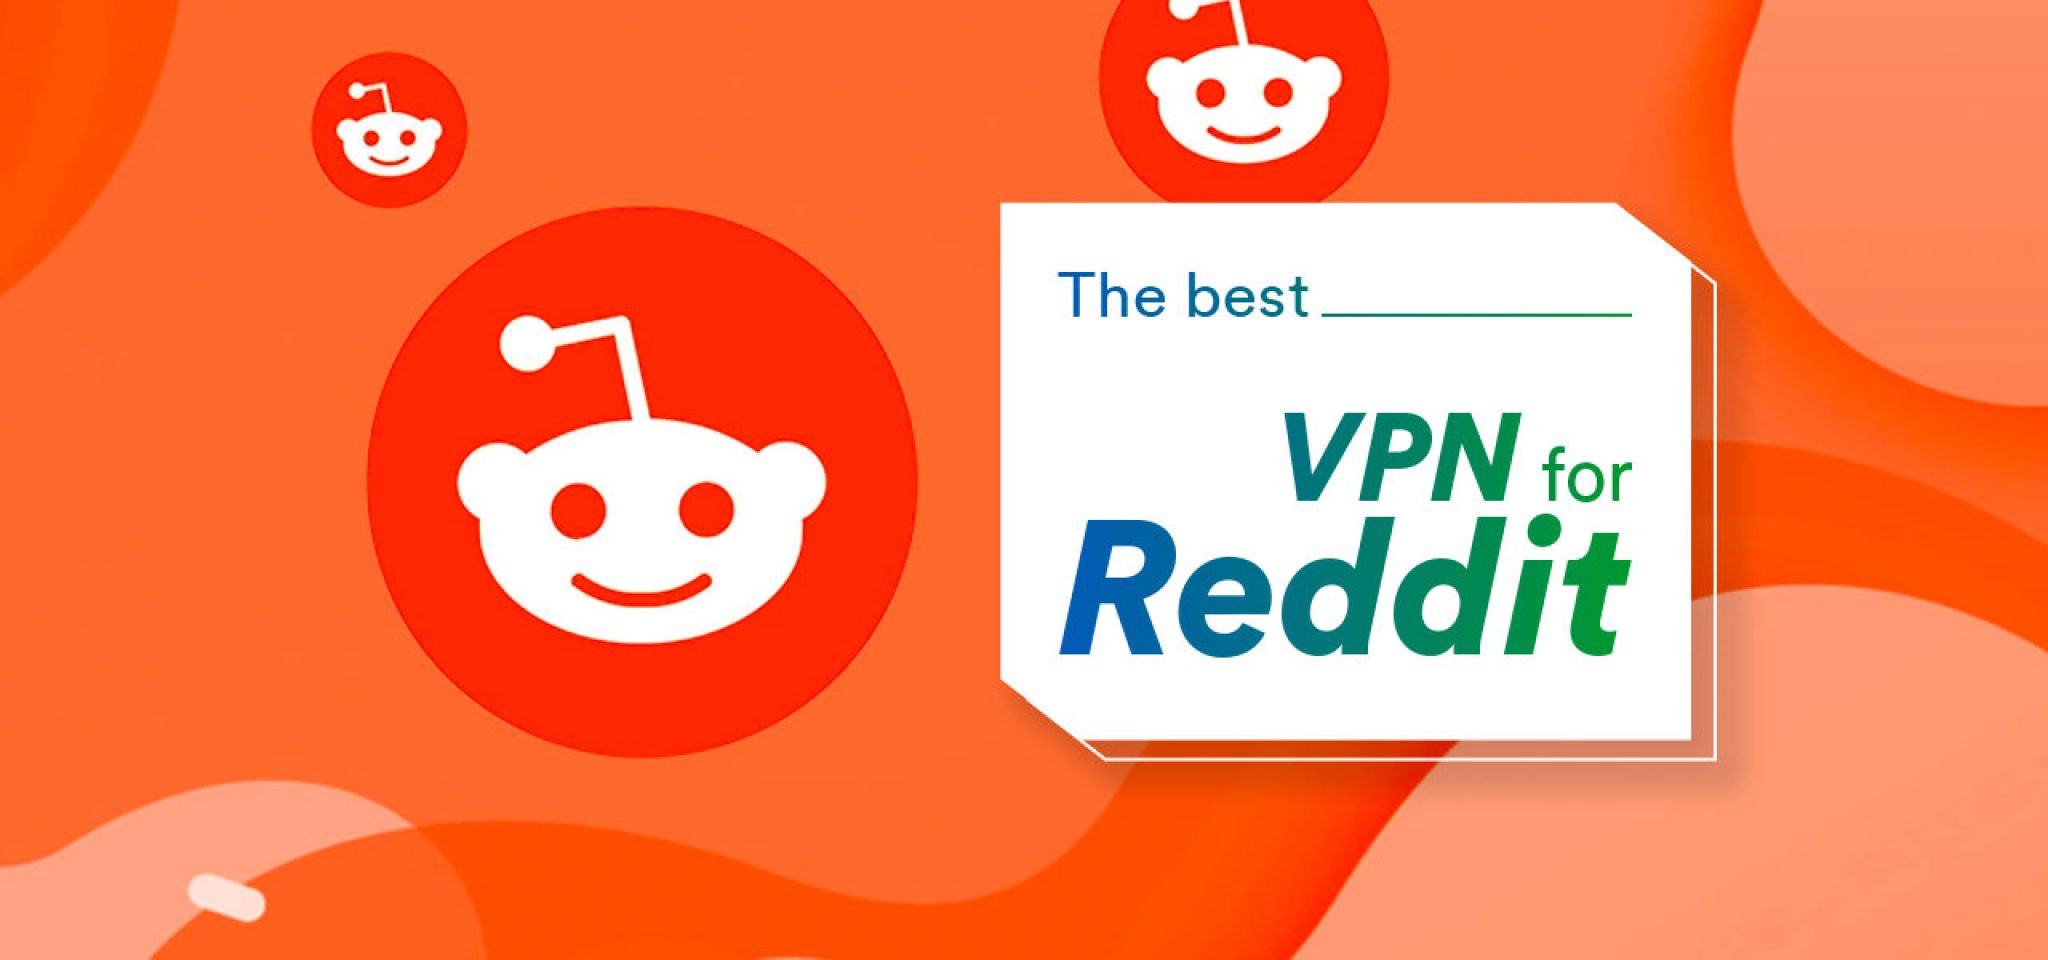 What is the best VPN according to Reddit in 2023?